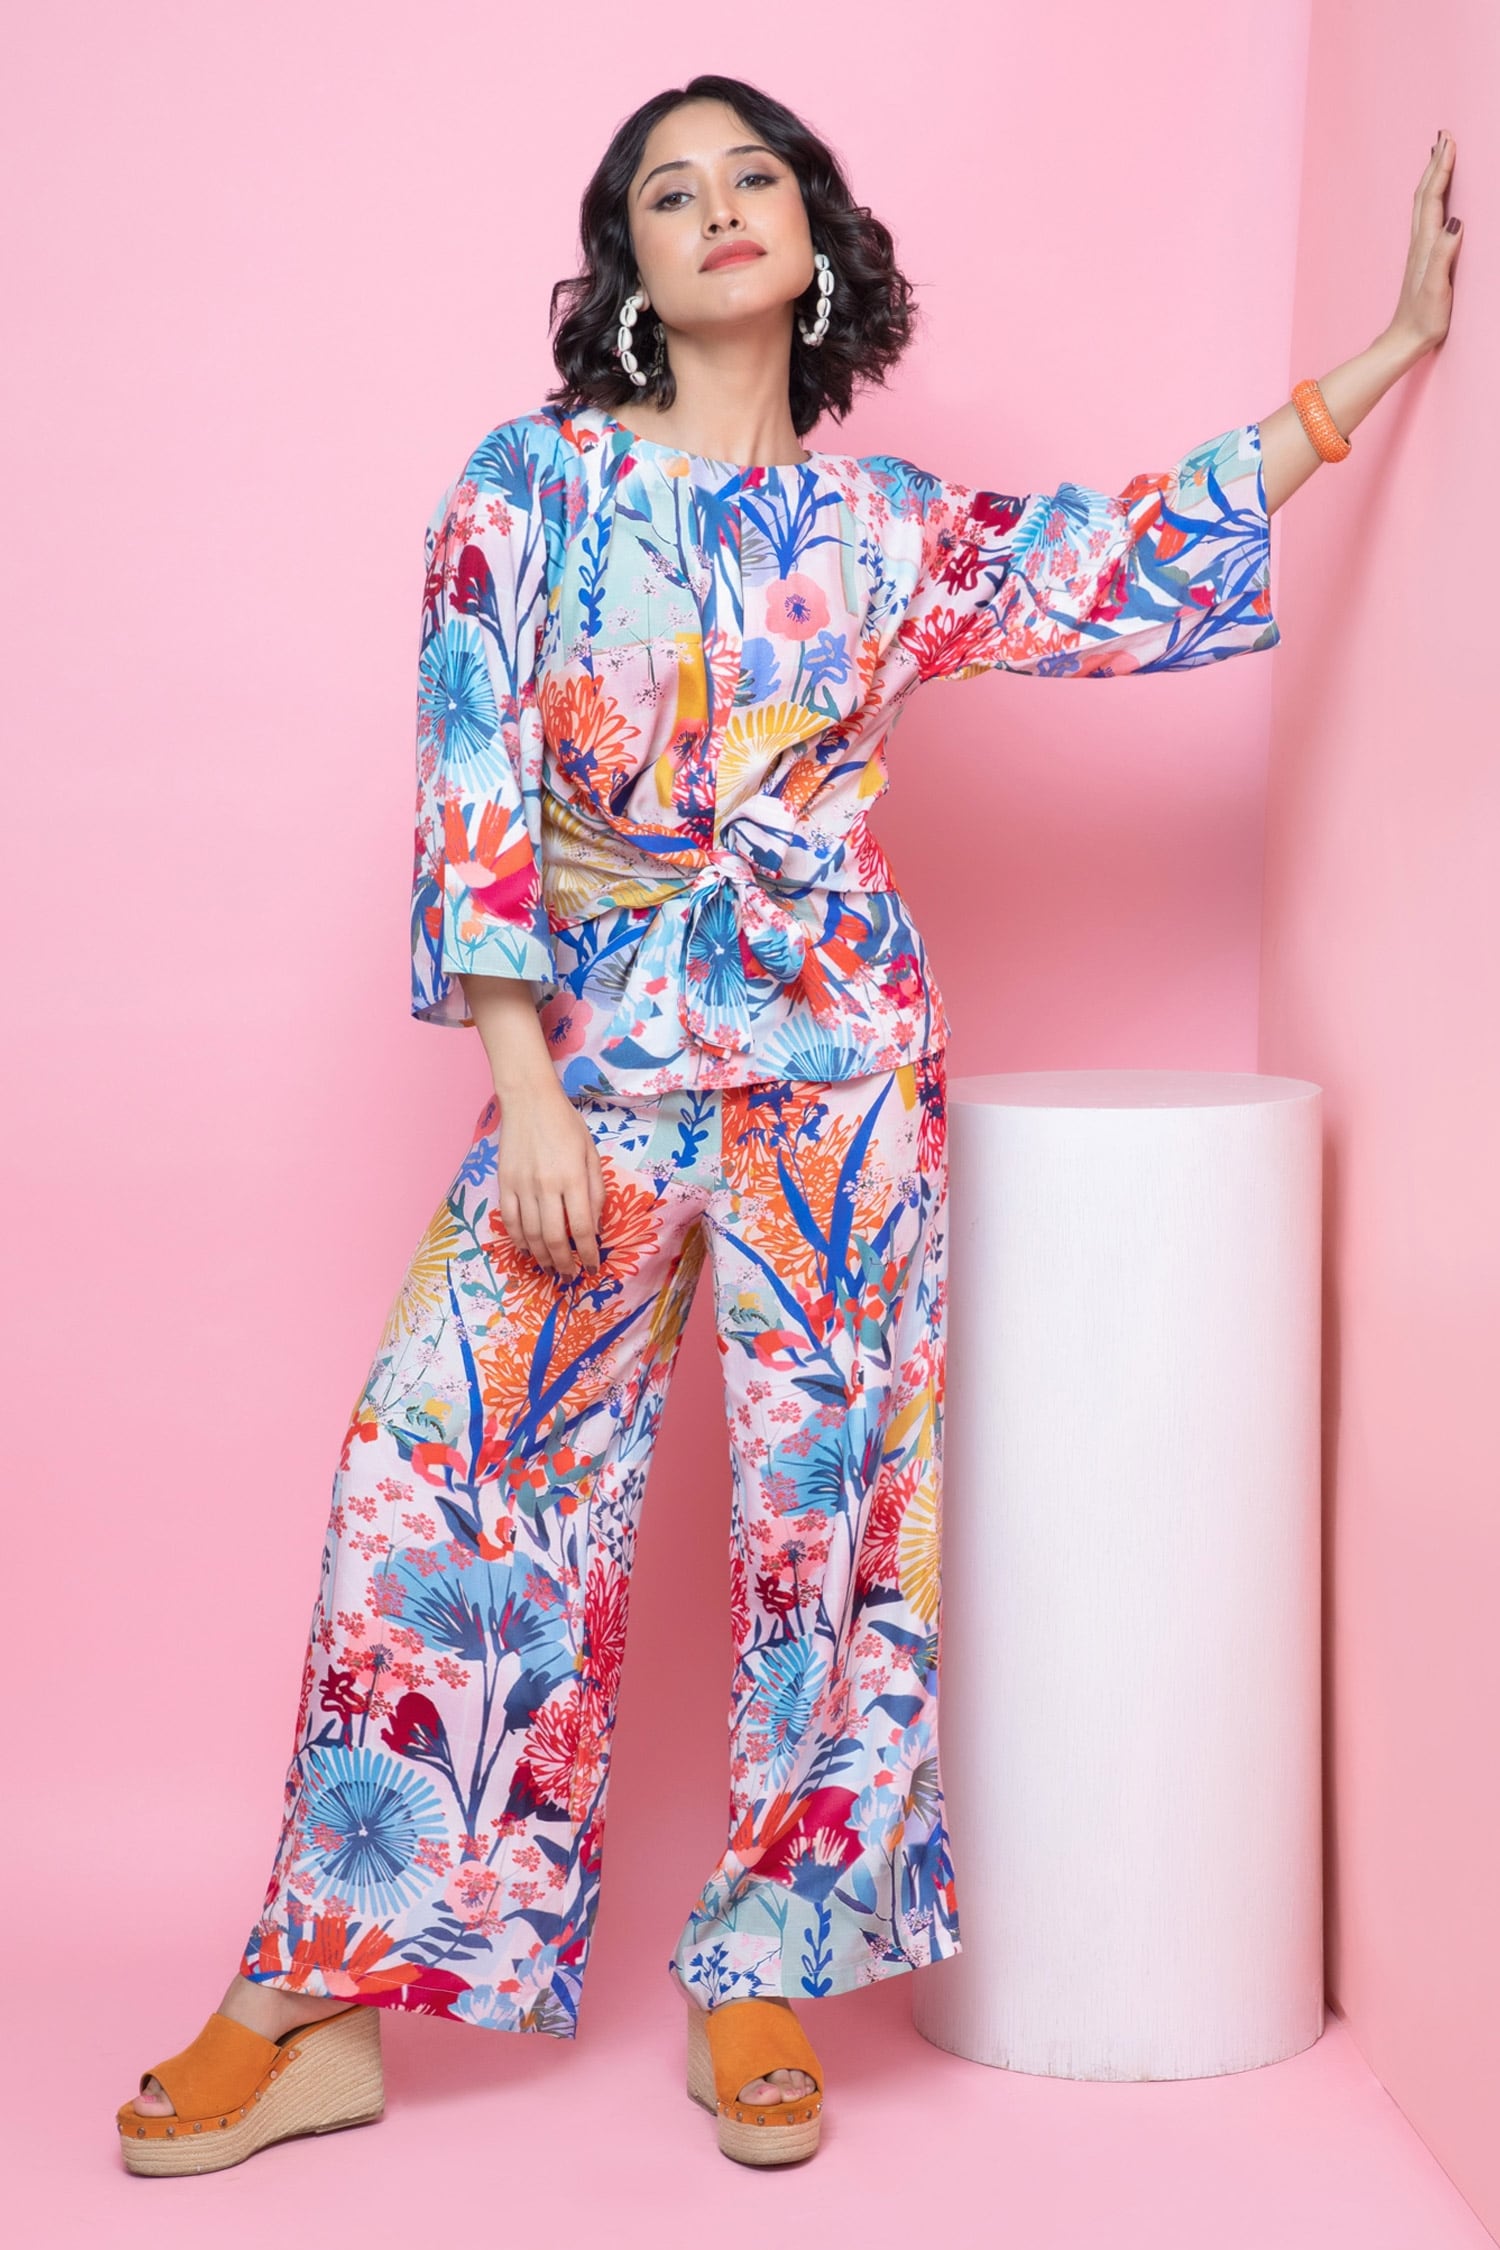 Buy Rhe-Ana Blue Rayon Blooming Flower Print Knotted Top And Pant Co ...